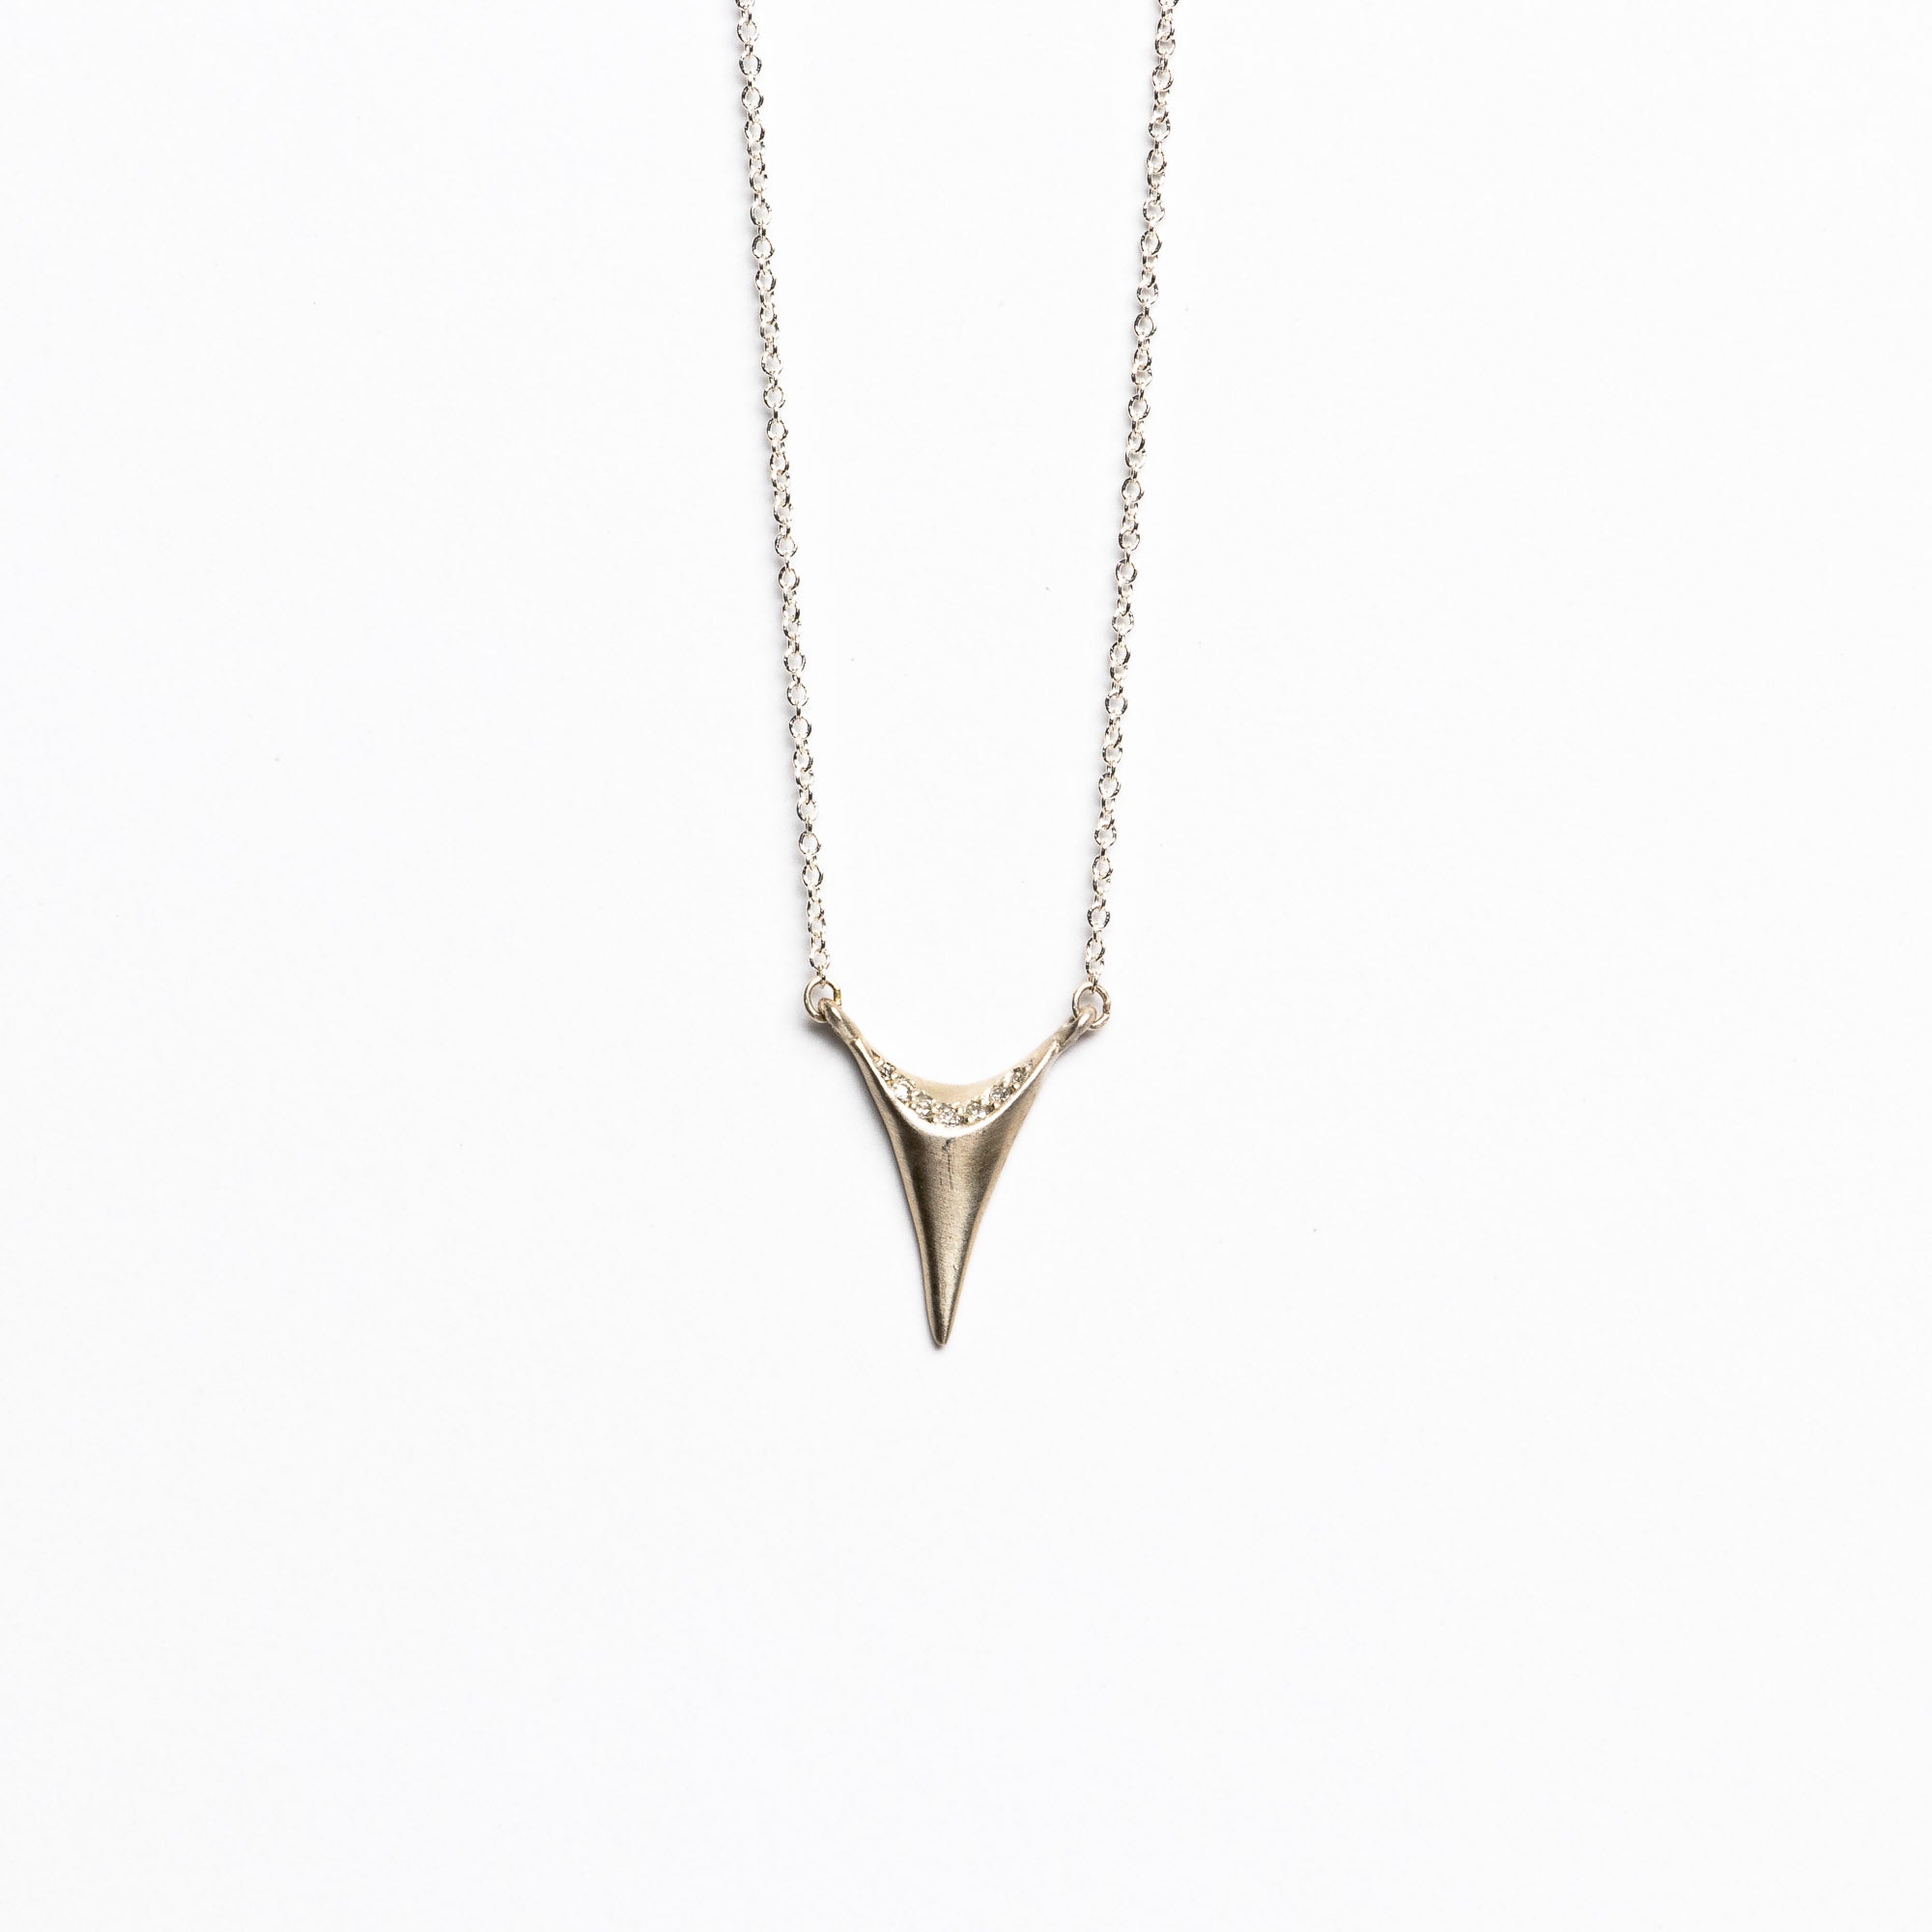 Branch Jewelry - Tooth necklace